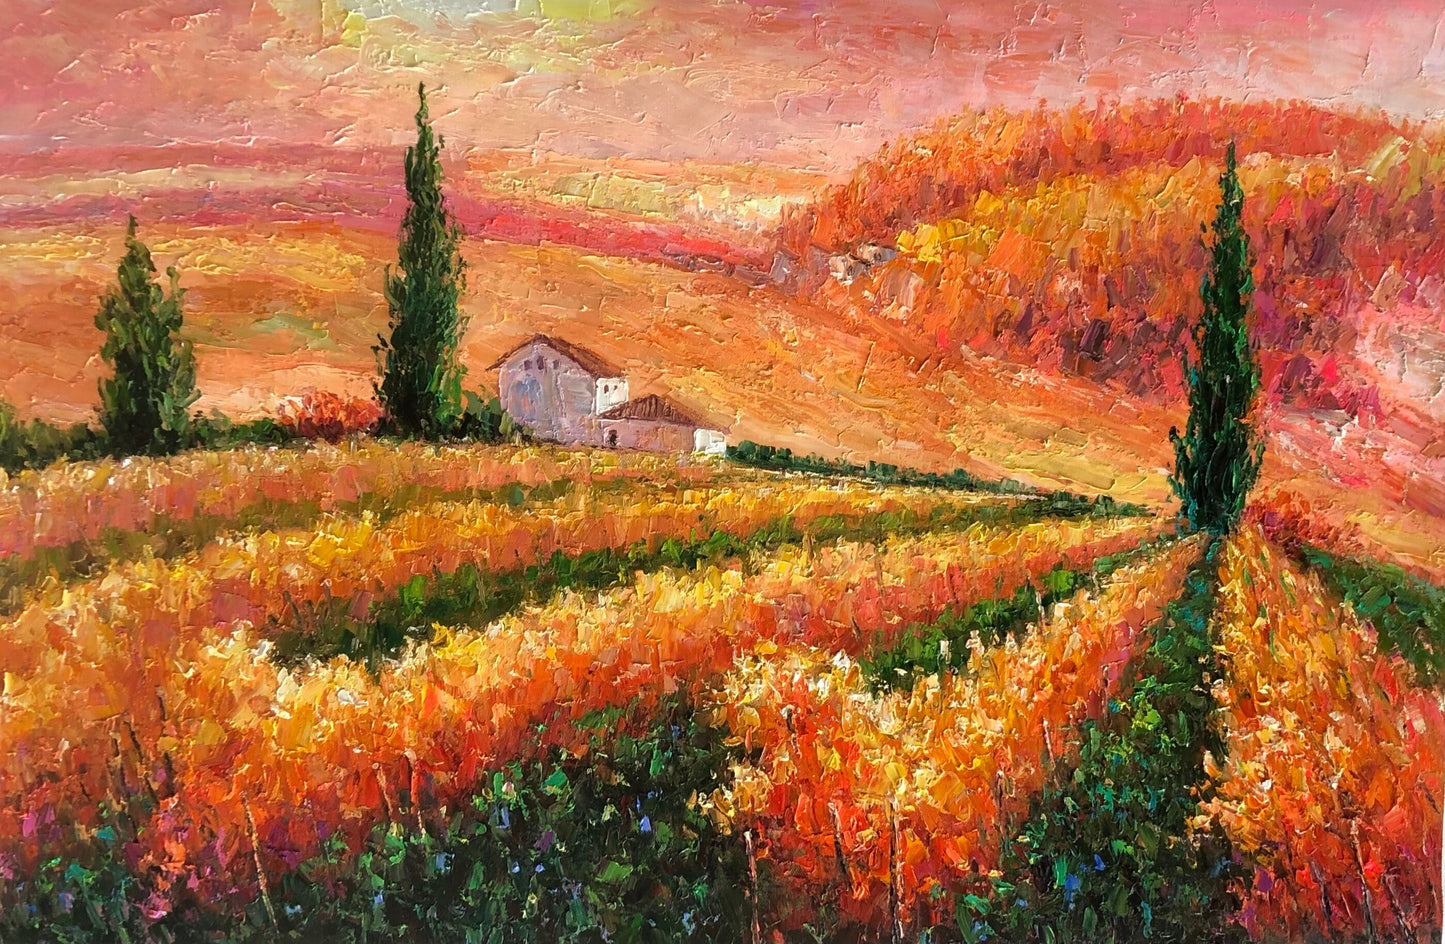 Abstract Landscape Oil Painting Large Abstract Landscape Painting Fall Landscape Painting French Landscape Painting Vinyard Oil Painting